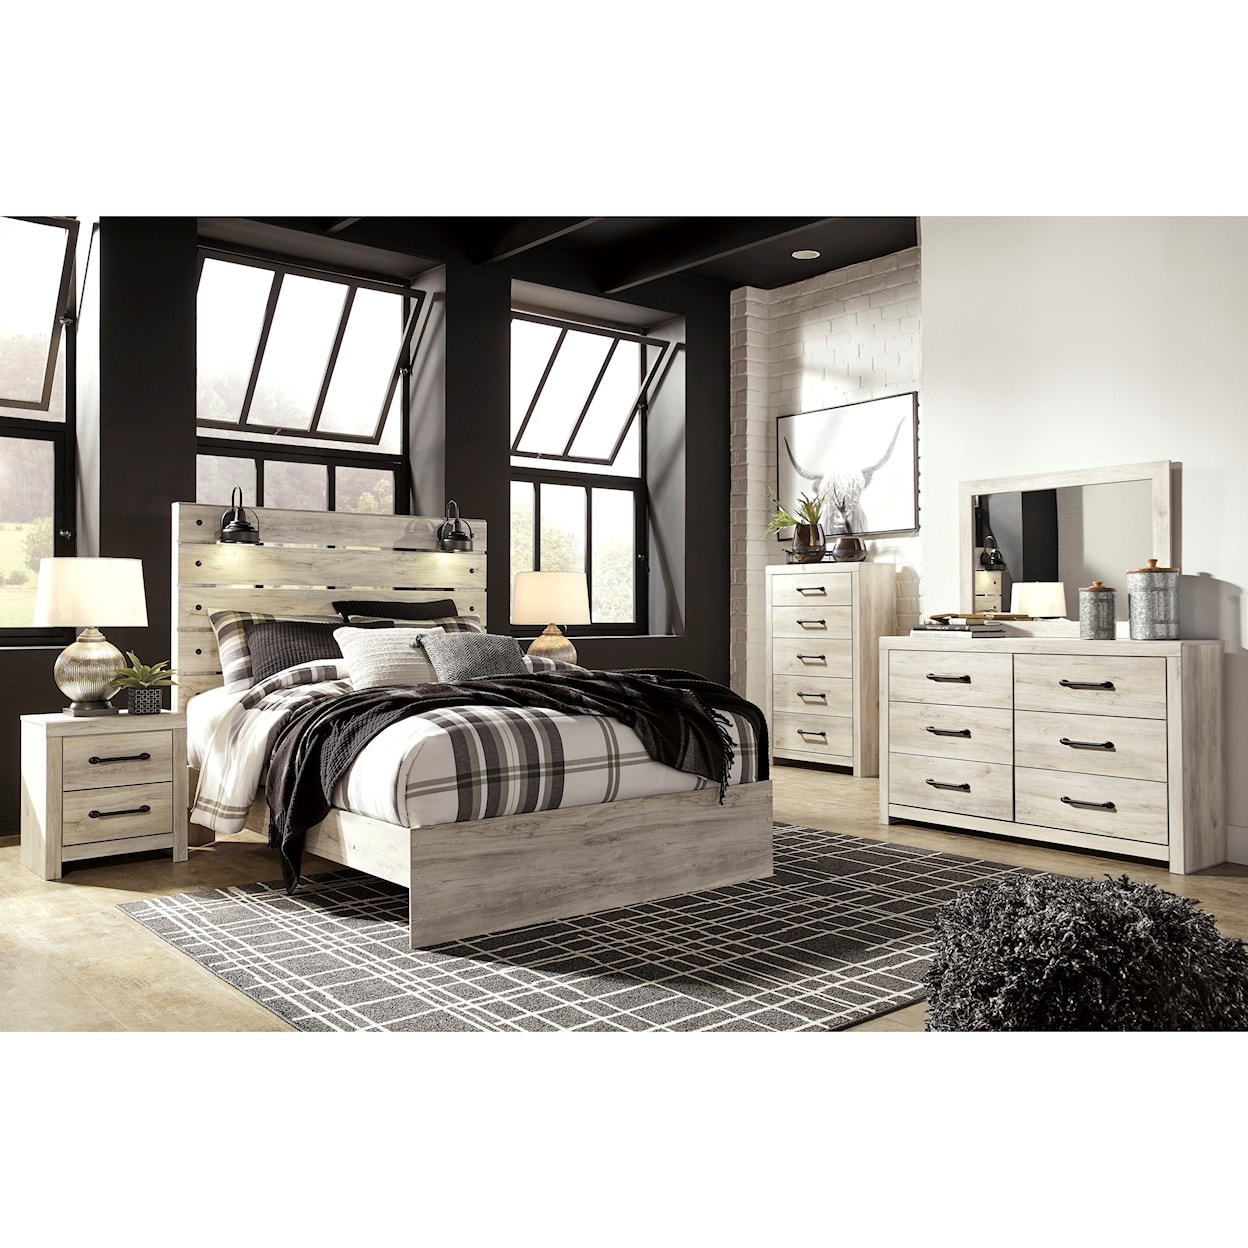 Signature Design by Ashley Furniture Cambeck Queen Bedroom Group